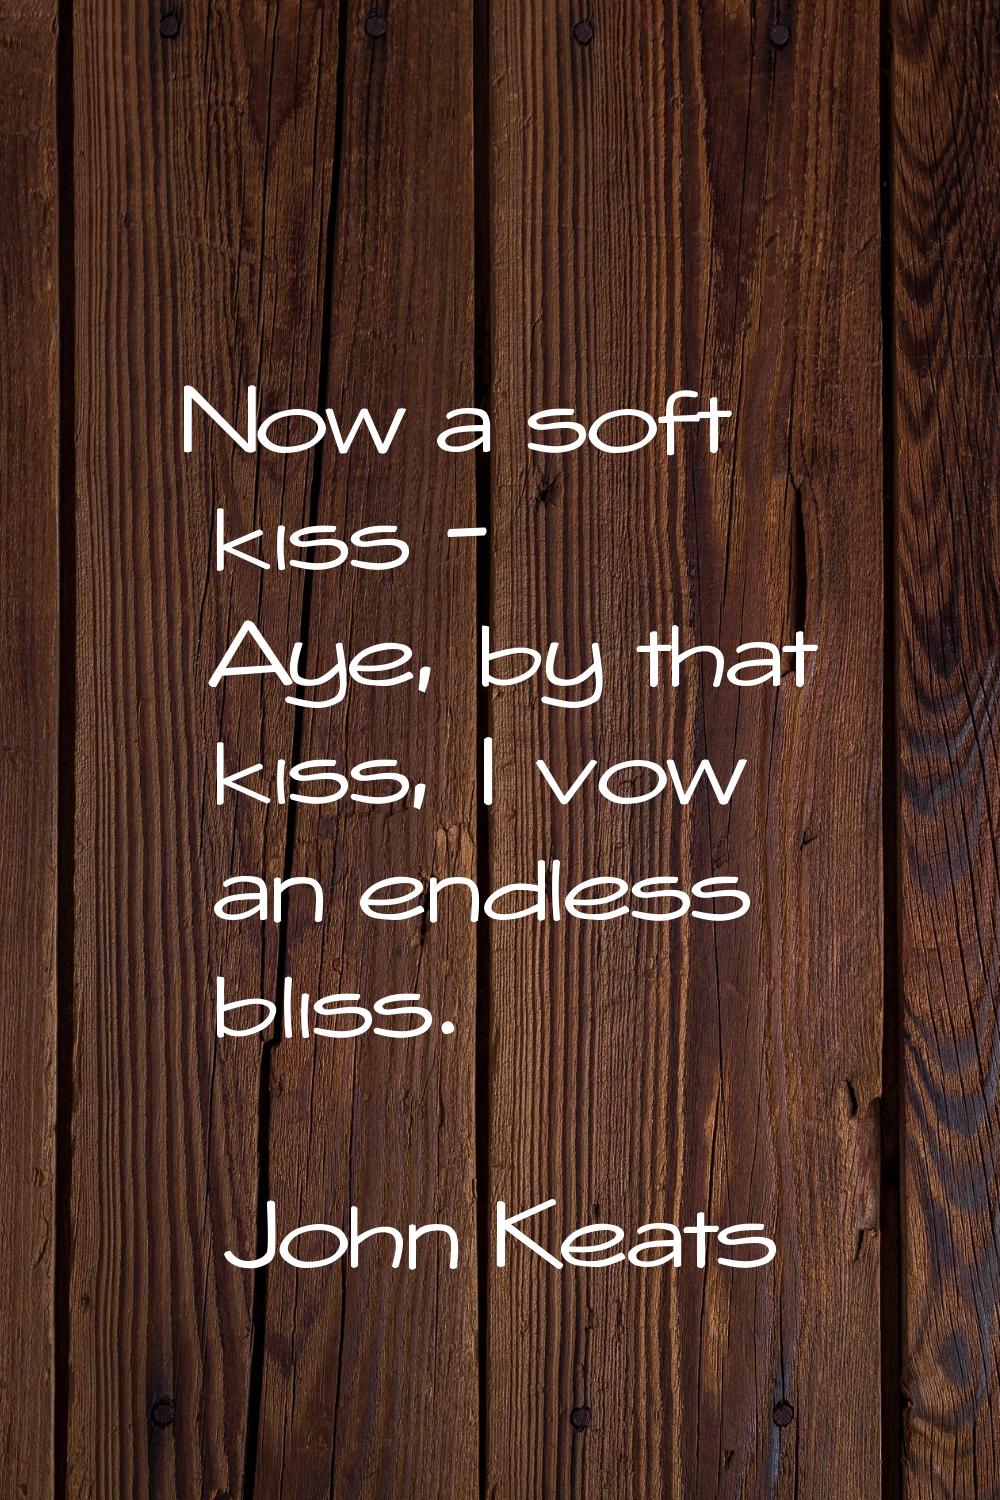 Now a soft kiss - Aye, by that kiss, I vow an endless bliss.